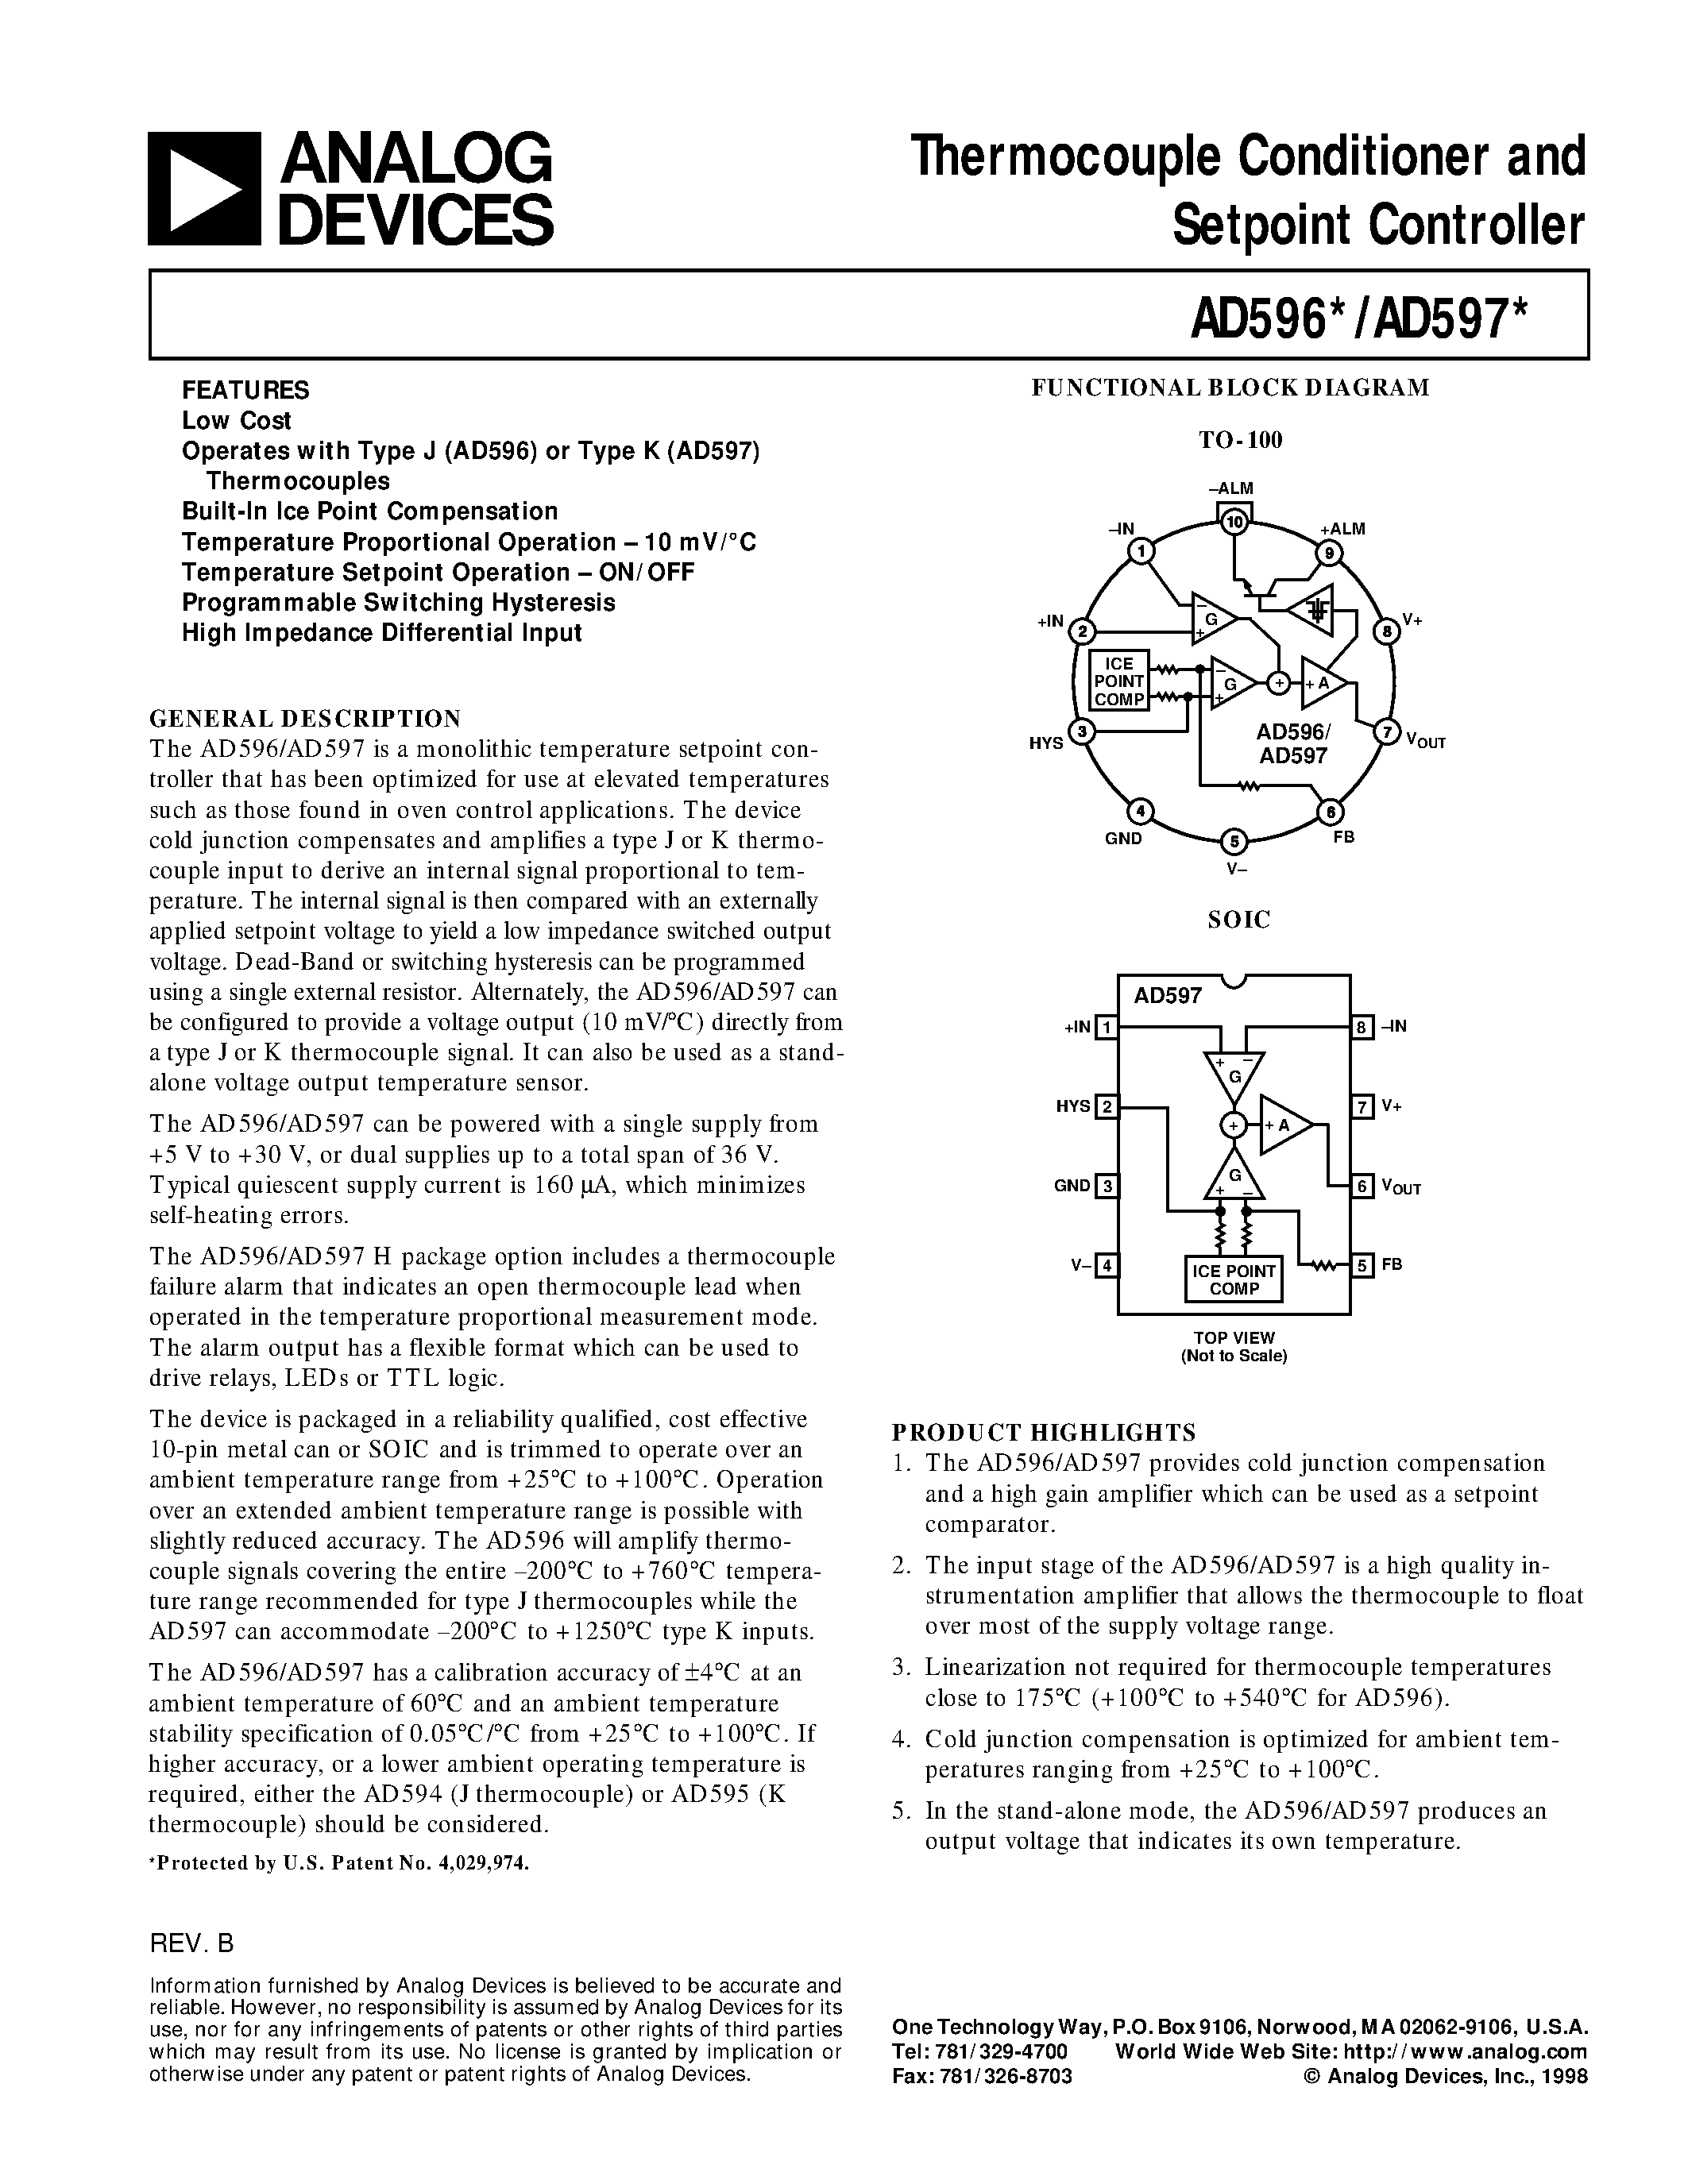 Datasheet AD596 - Thermocouple Conditioner and Setpoint Controller page 1